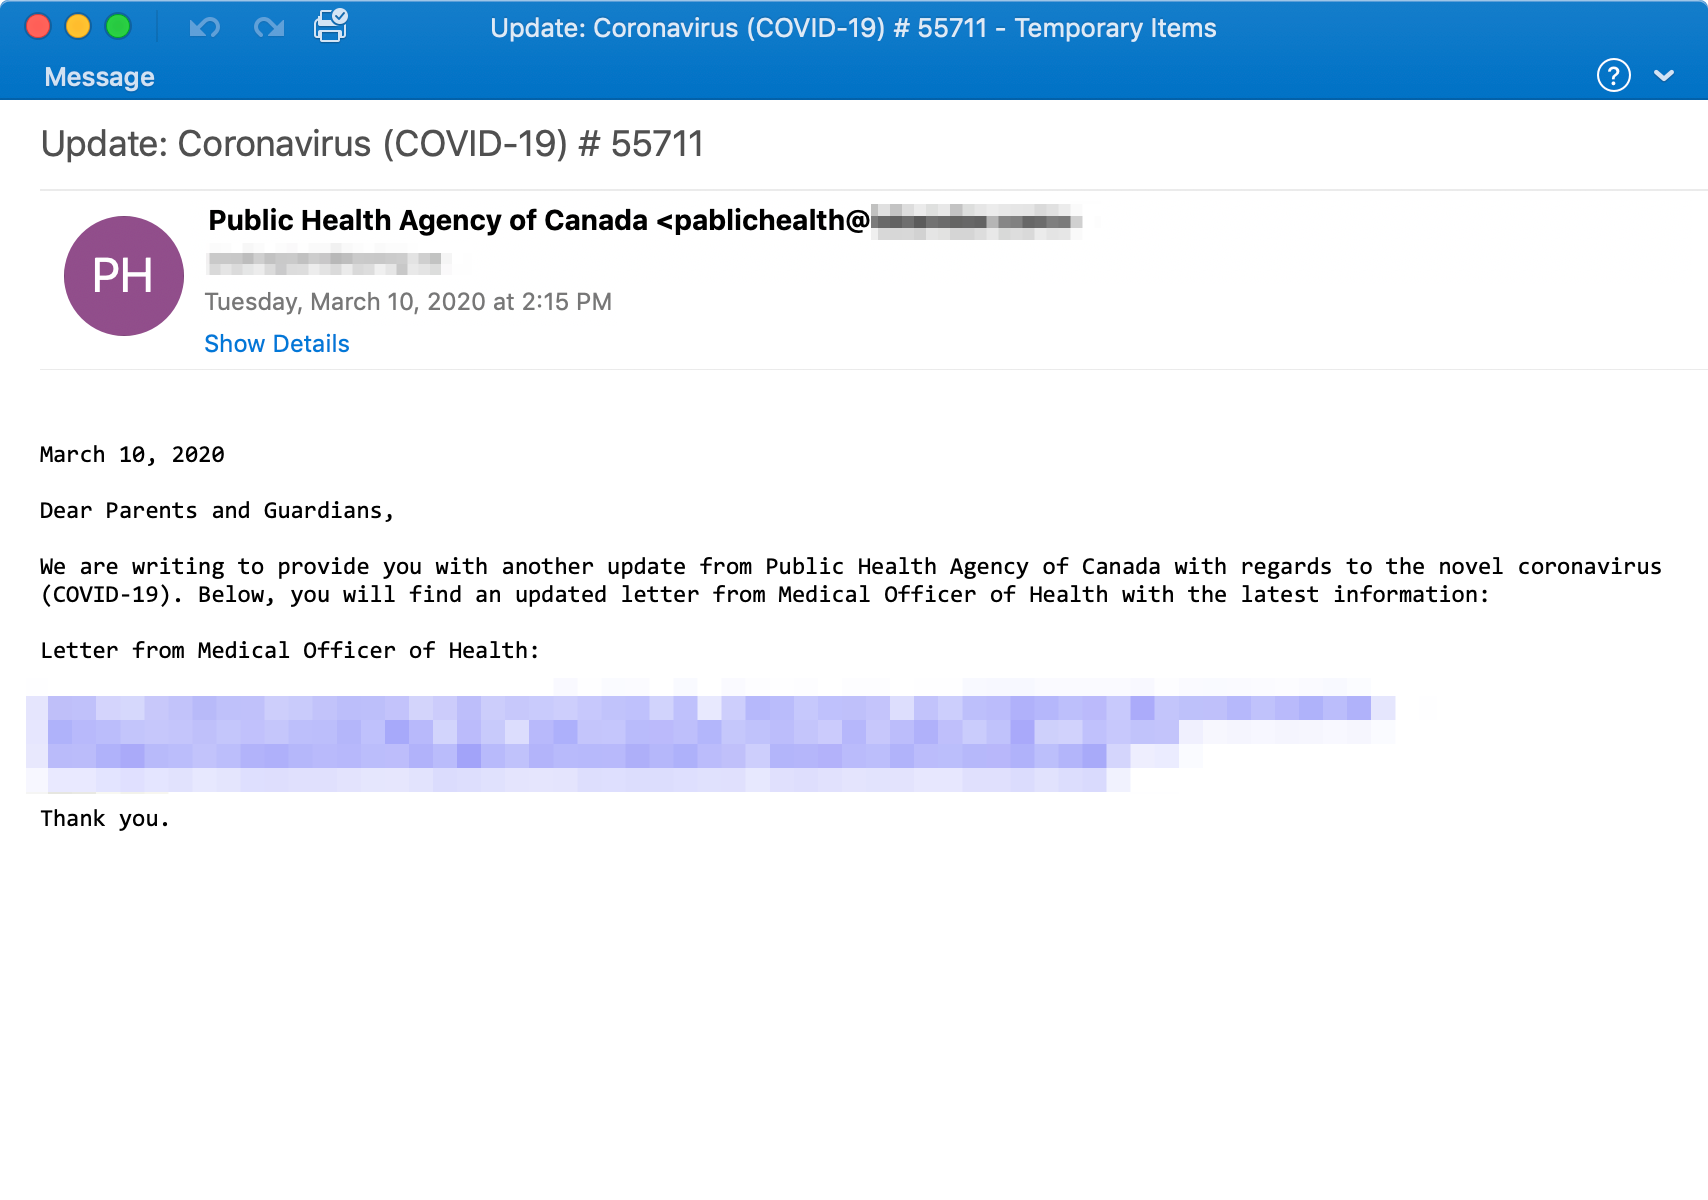 COVID-19 TA564 Urnsif Banker Cyber Attack Email